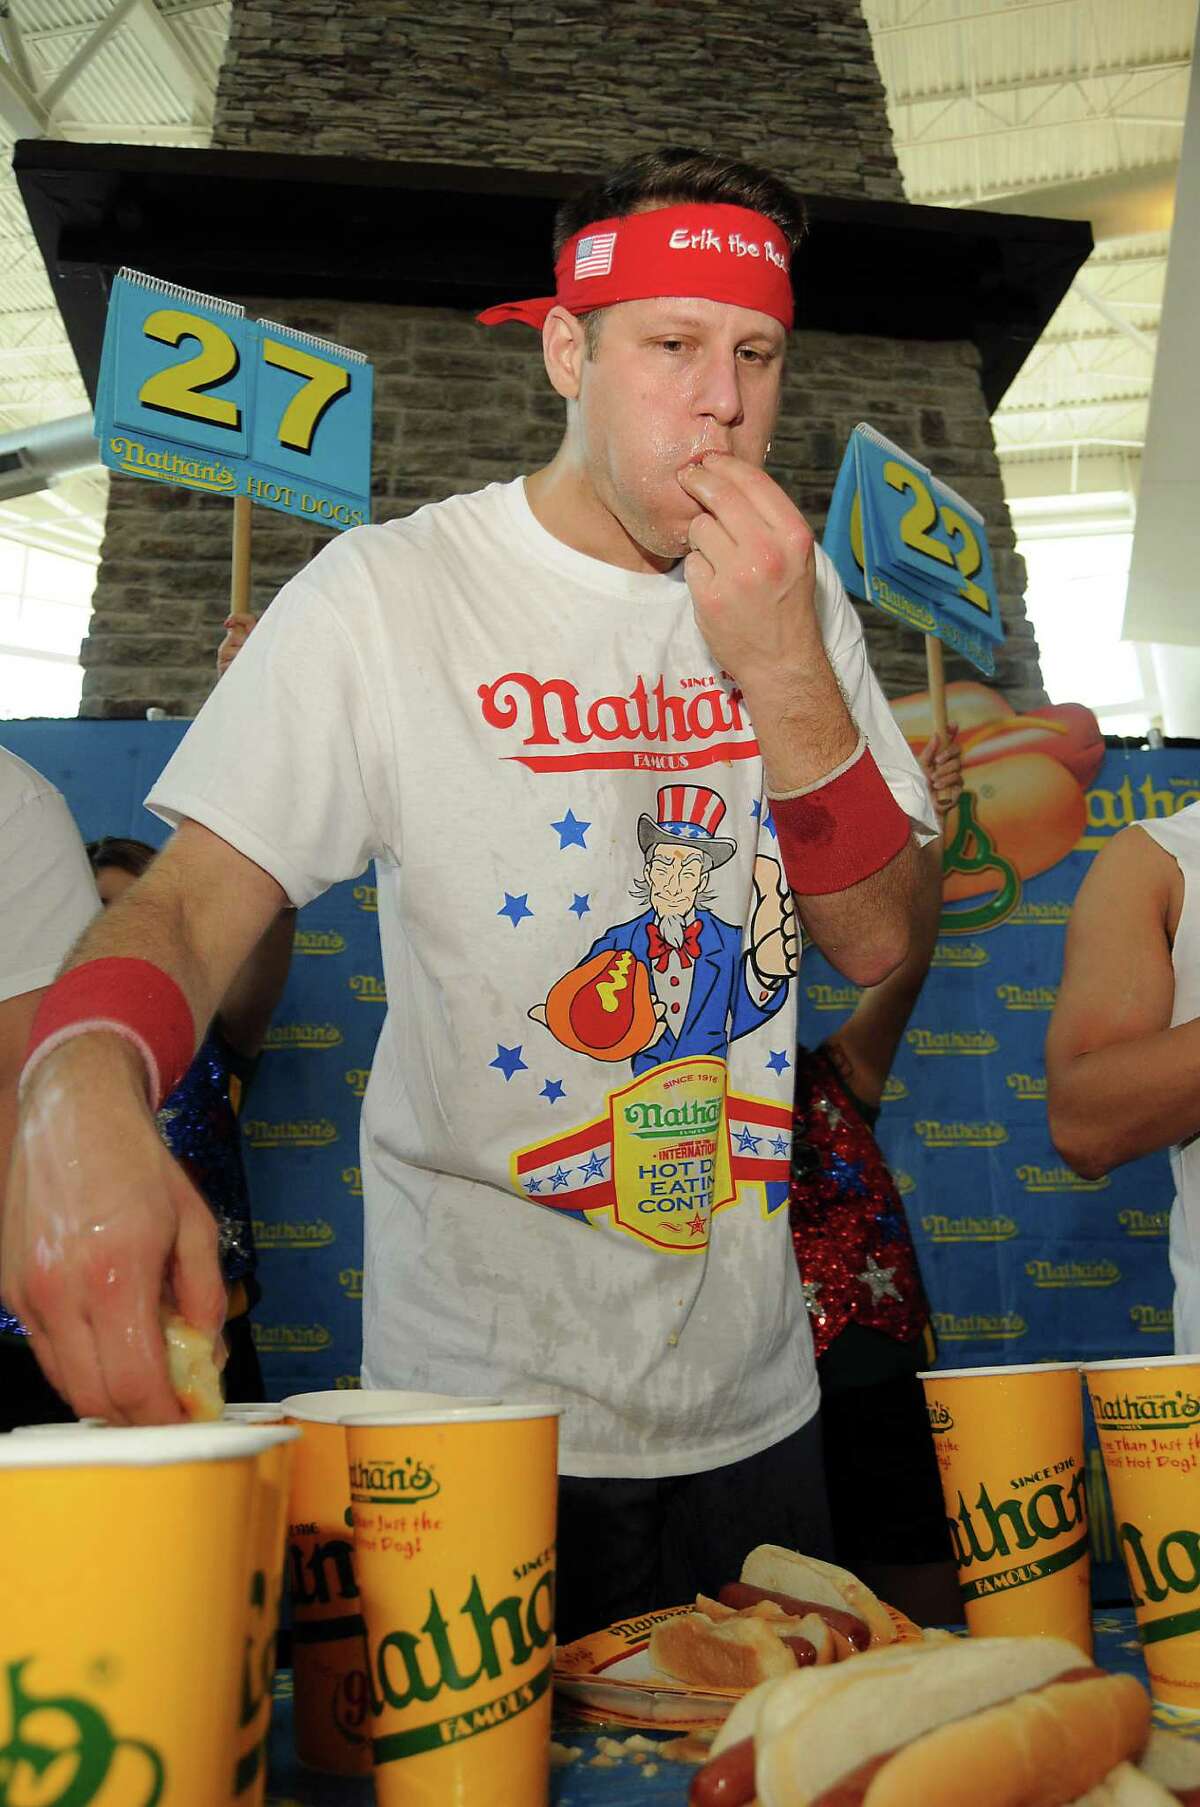 Men's favorite Erik "The Red" Denmark competes at the Nathan's Famous Hot Dog Eating Contest regional qualifier at Memorial City Mall Saturday May 03, 2014.(Dave Rossman photo)